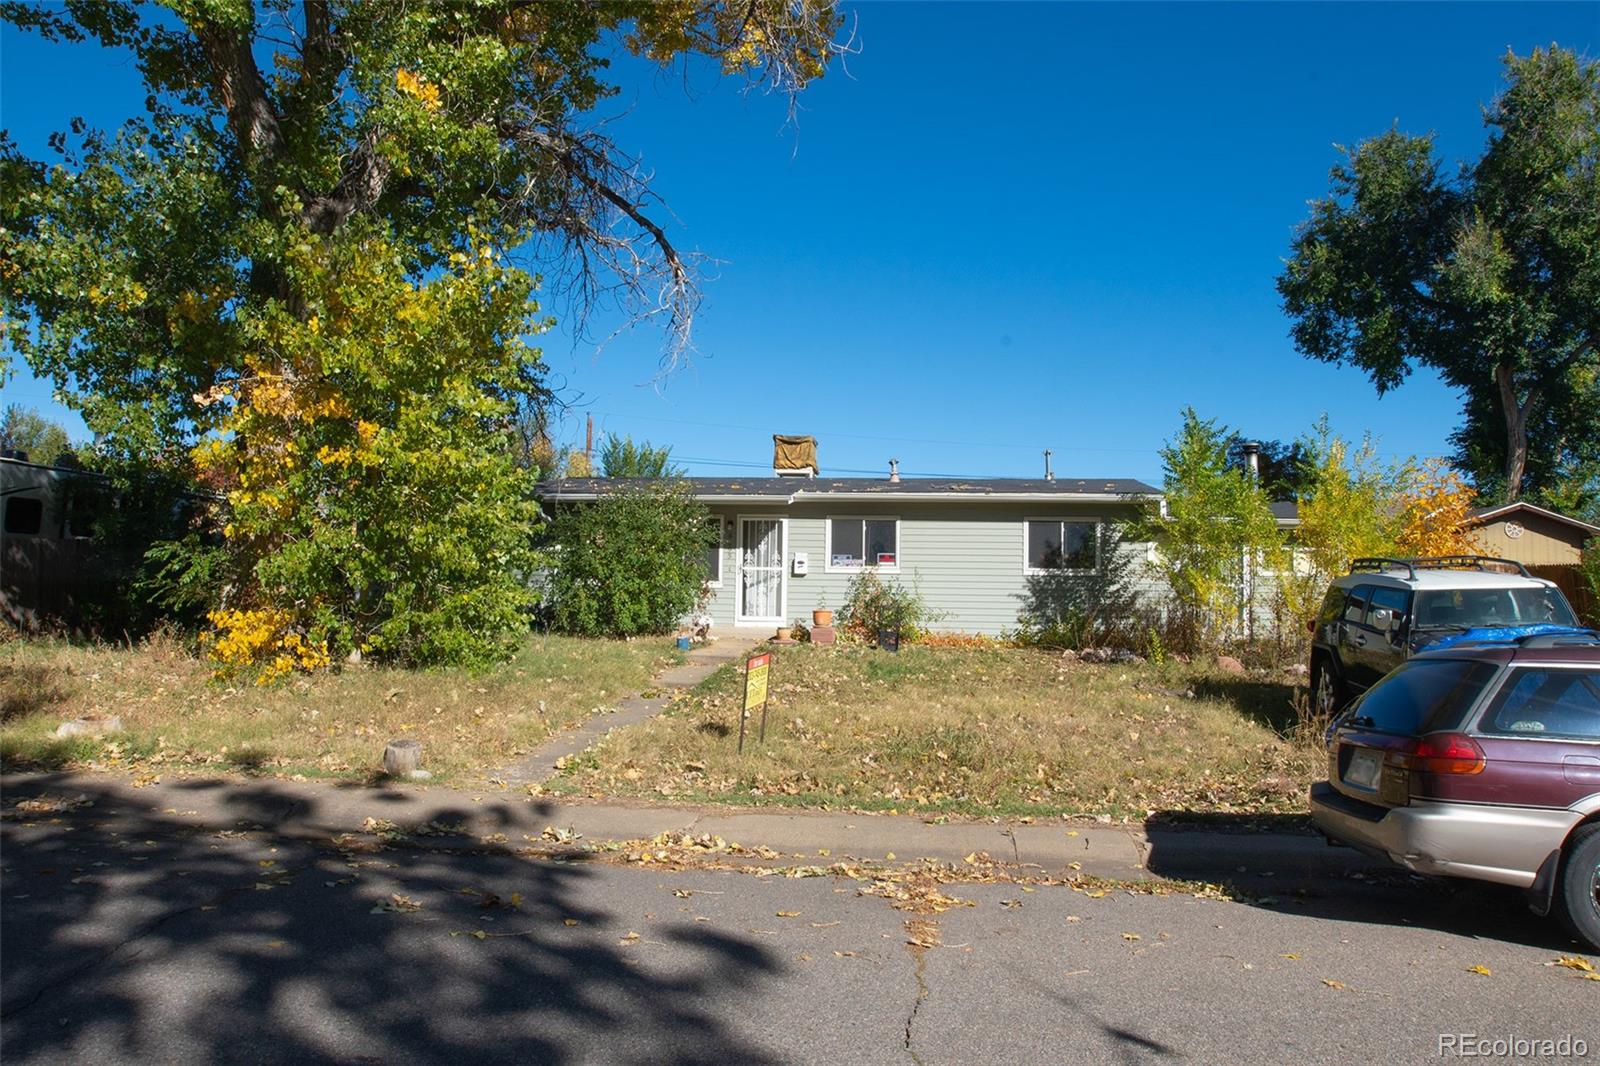 9095 W 49th Place, arvada MLS: 6240262 Beds: 3 Baths: 1 Price: $300,000